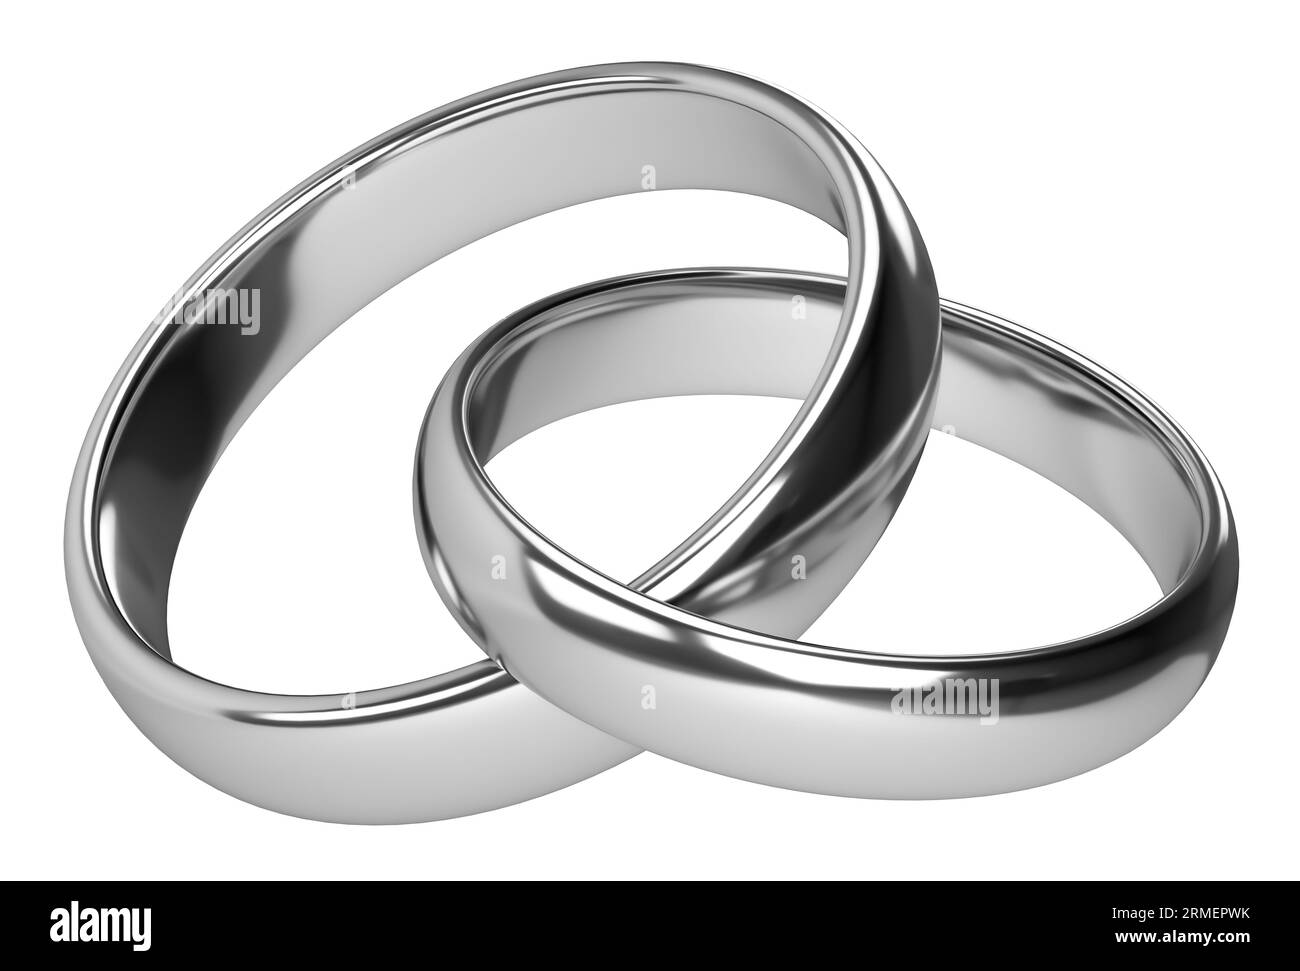 Wedding Rings Divorce Cliparts, Stock Vector and Royalty Free Wedding Rings  Divorce Illustrations